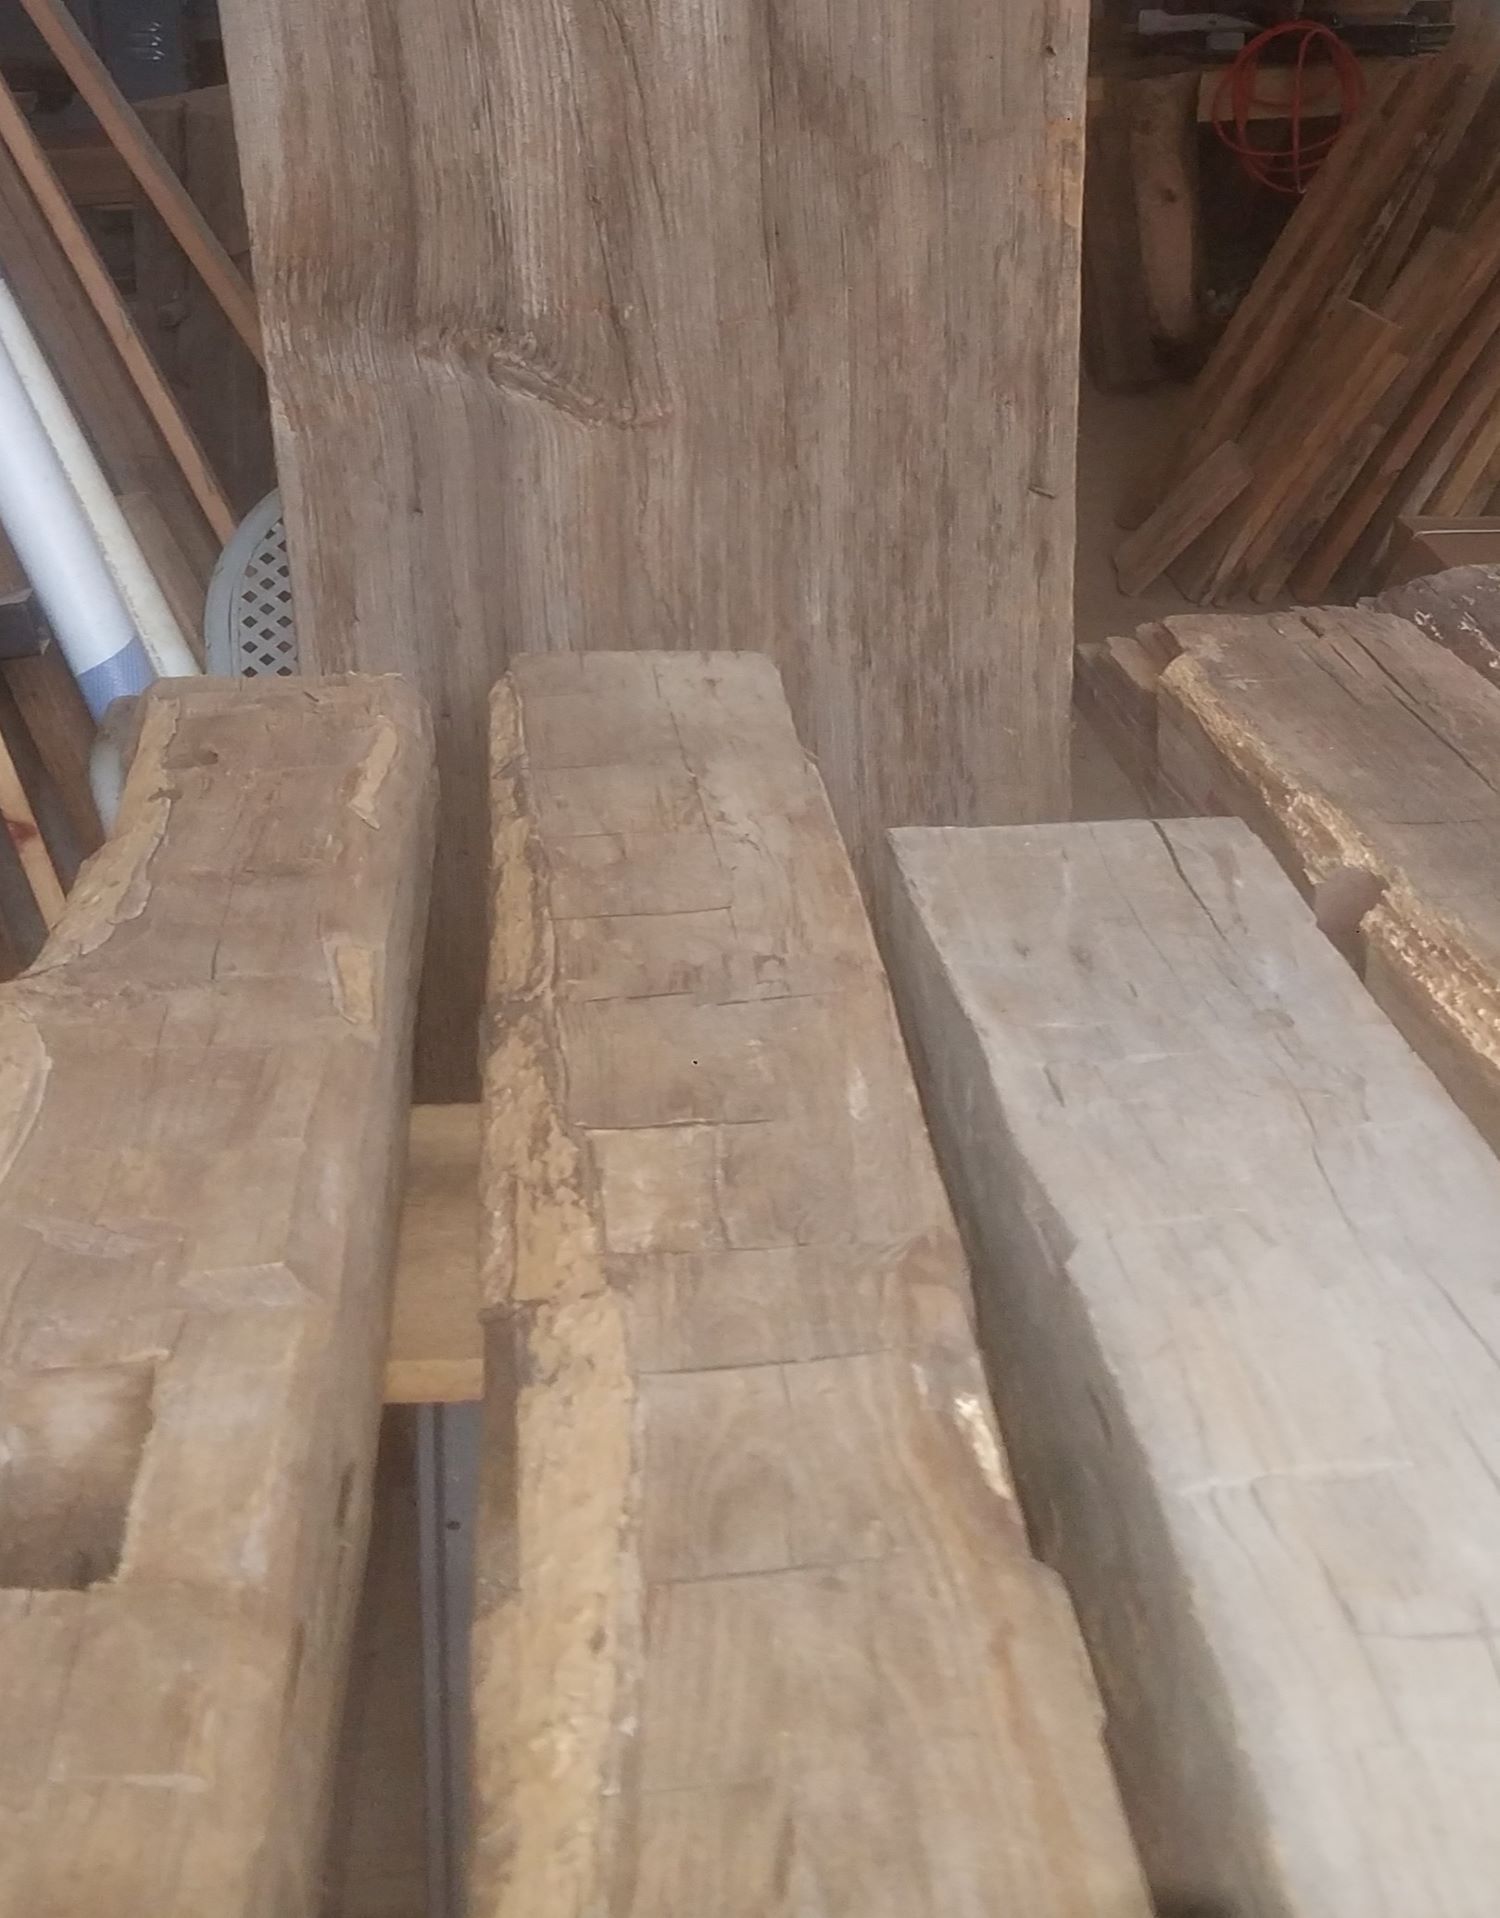 Hand hewn beams that will be used as rafters in a customer's vacation  home